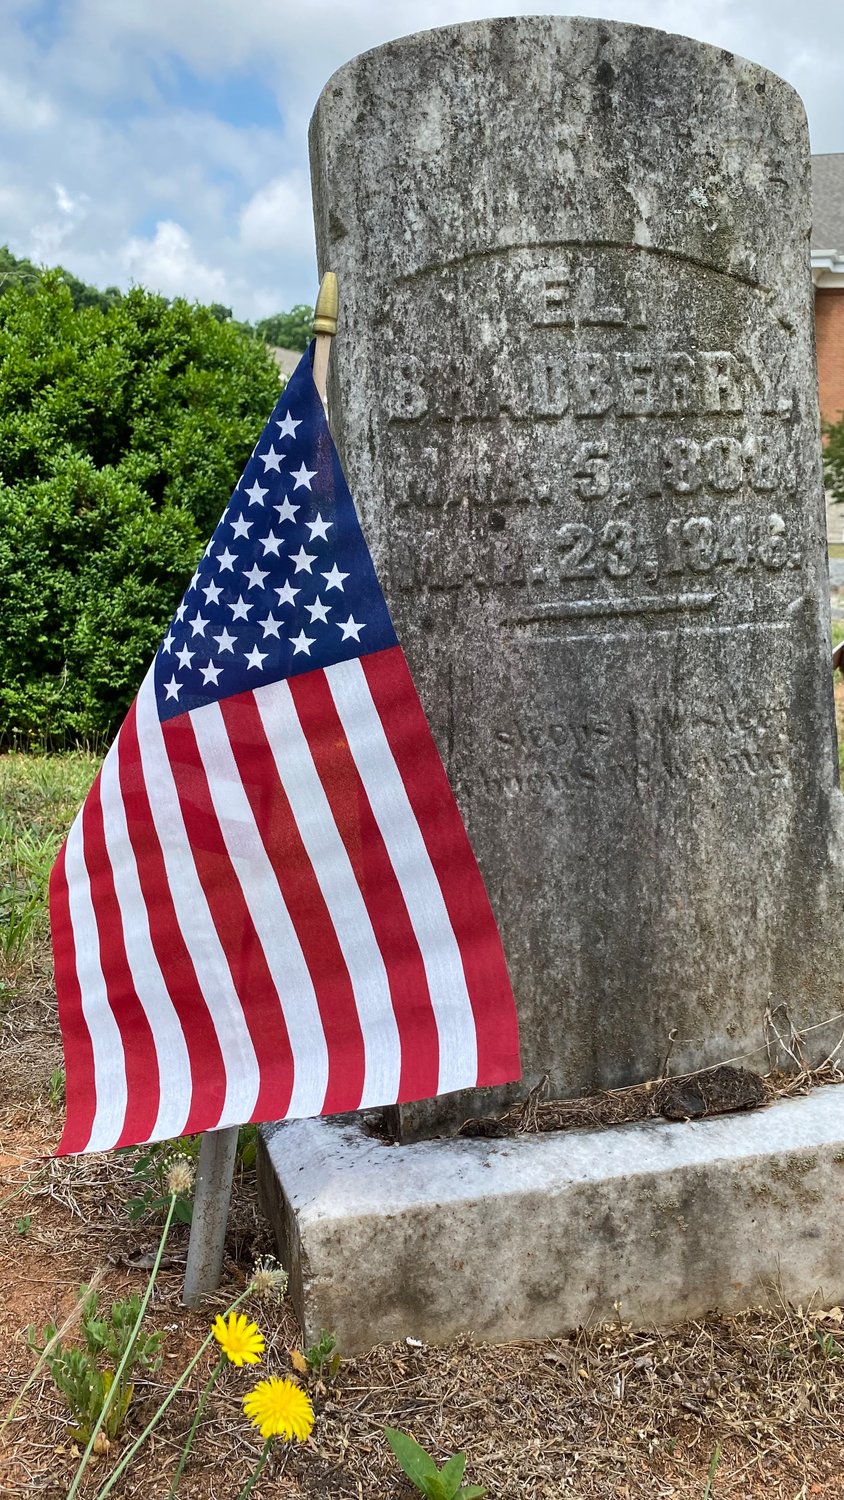 Eli Bradbery (1808-1846) was a Baptist layman killed in during war with Mexico in 1846. He left a widow Louisa with 10 children. Four of their sons died in the Civil War. He is buried in the Mars Hill Baptist cemetery in Watkinsville, Ga. (Photo/Charles Jones)